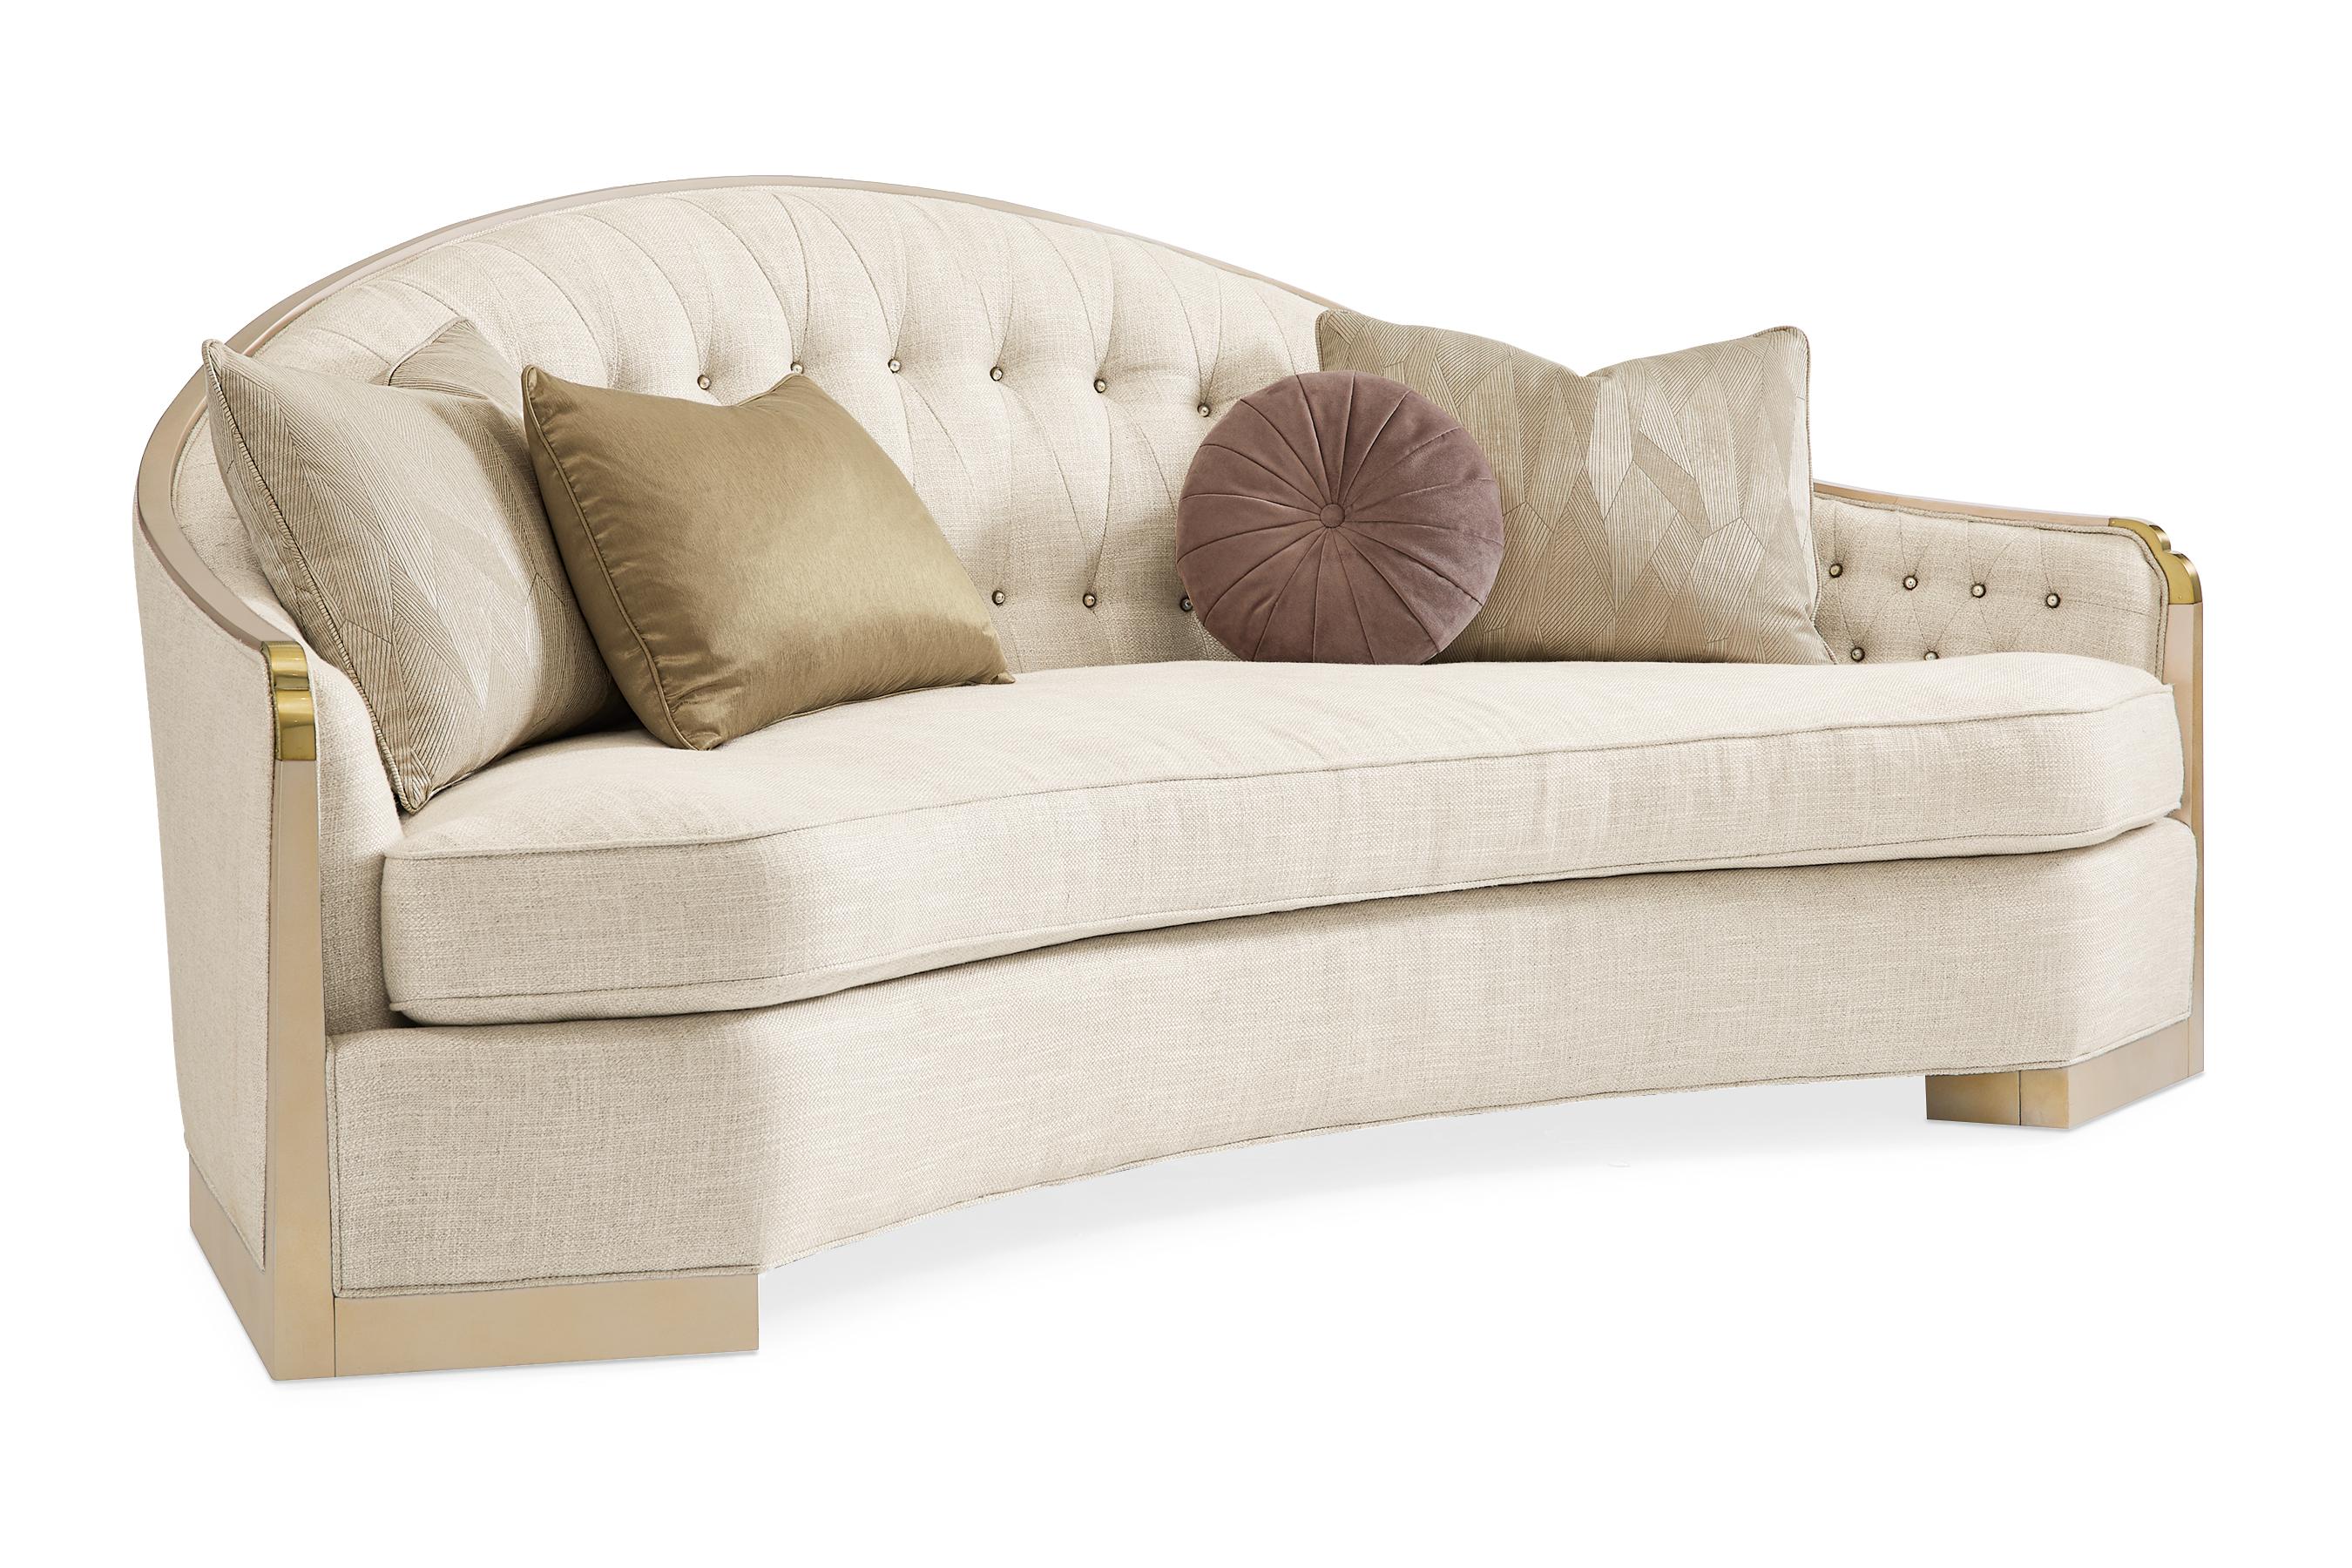 Traditional Sofa SHE'S A CHARMER UPH-018-111-A in Cream, Champagne Fabric